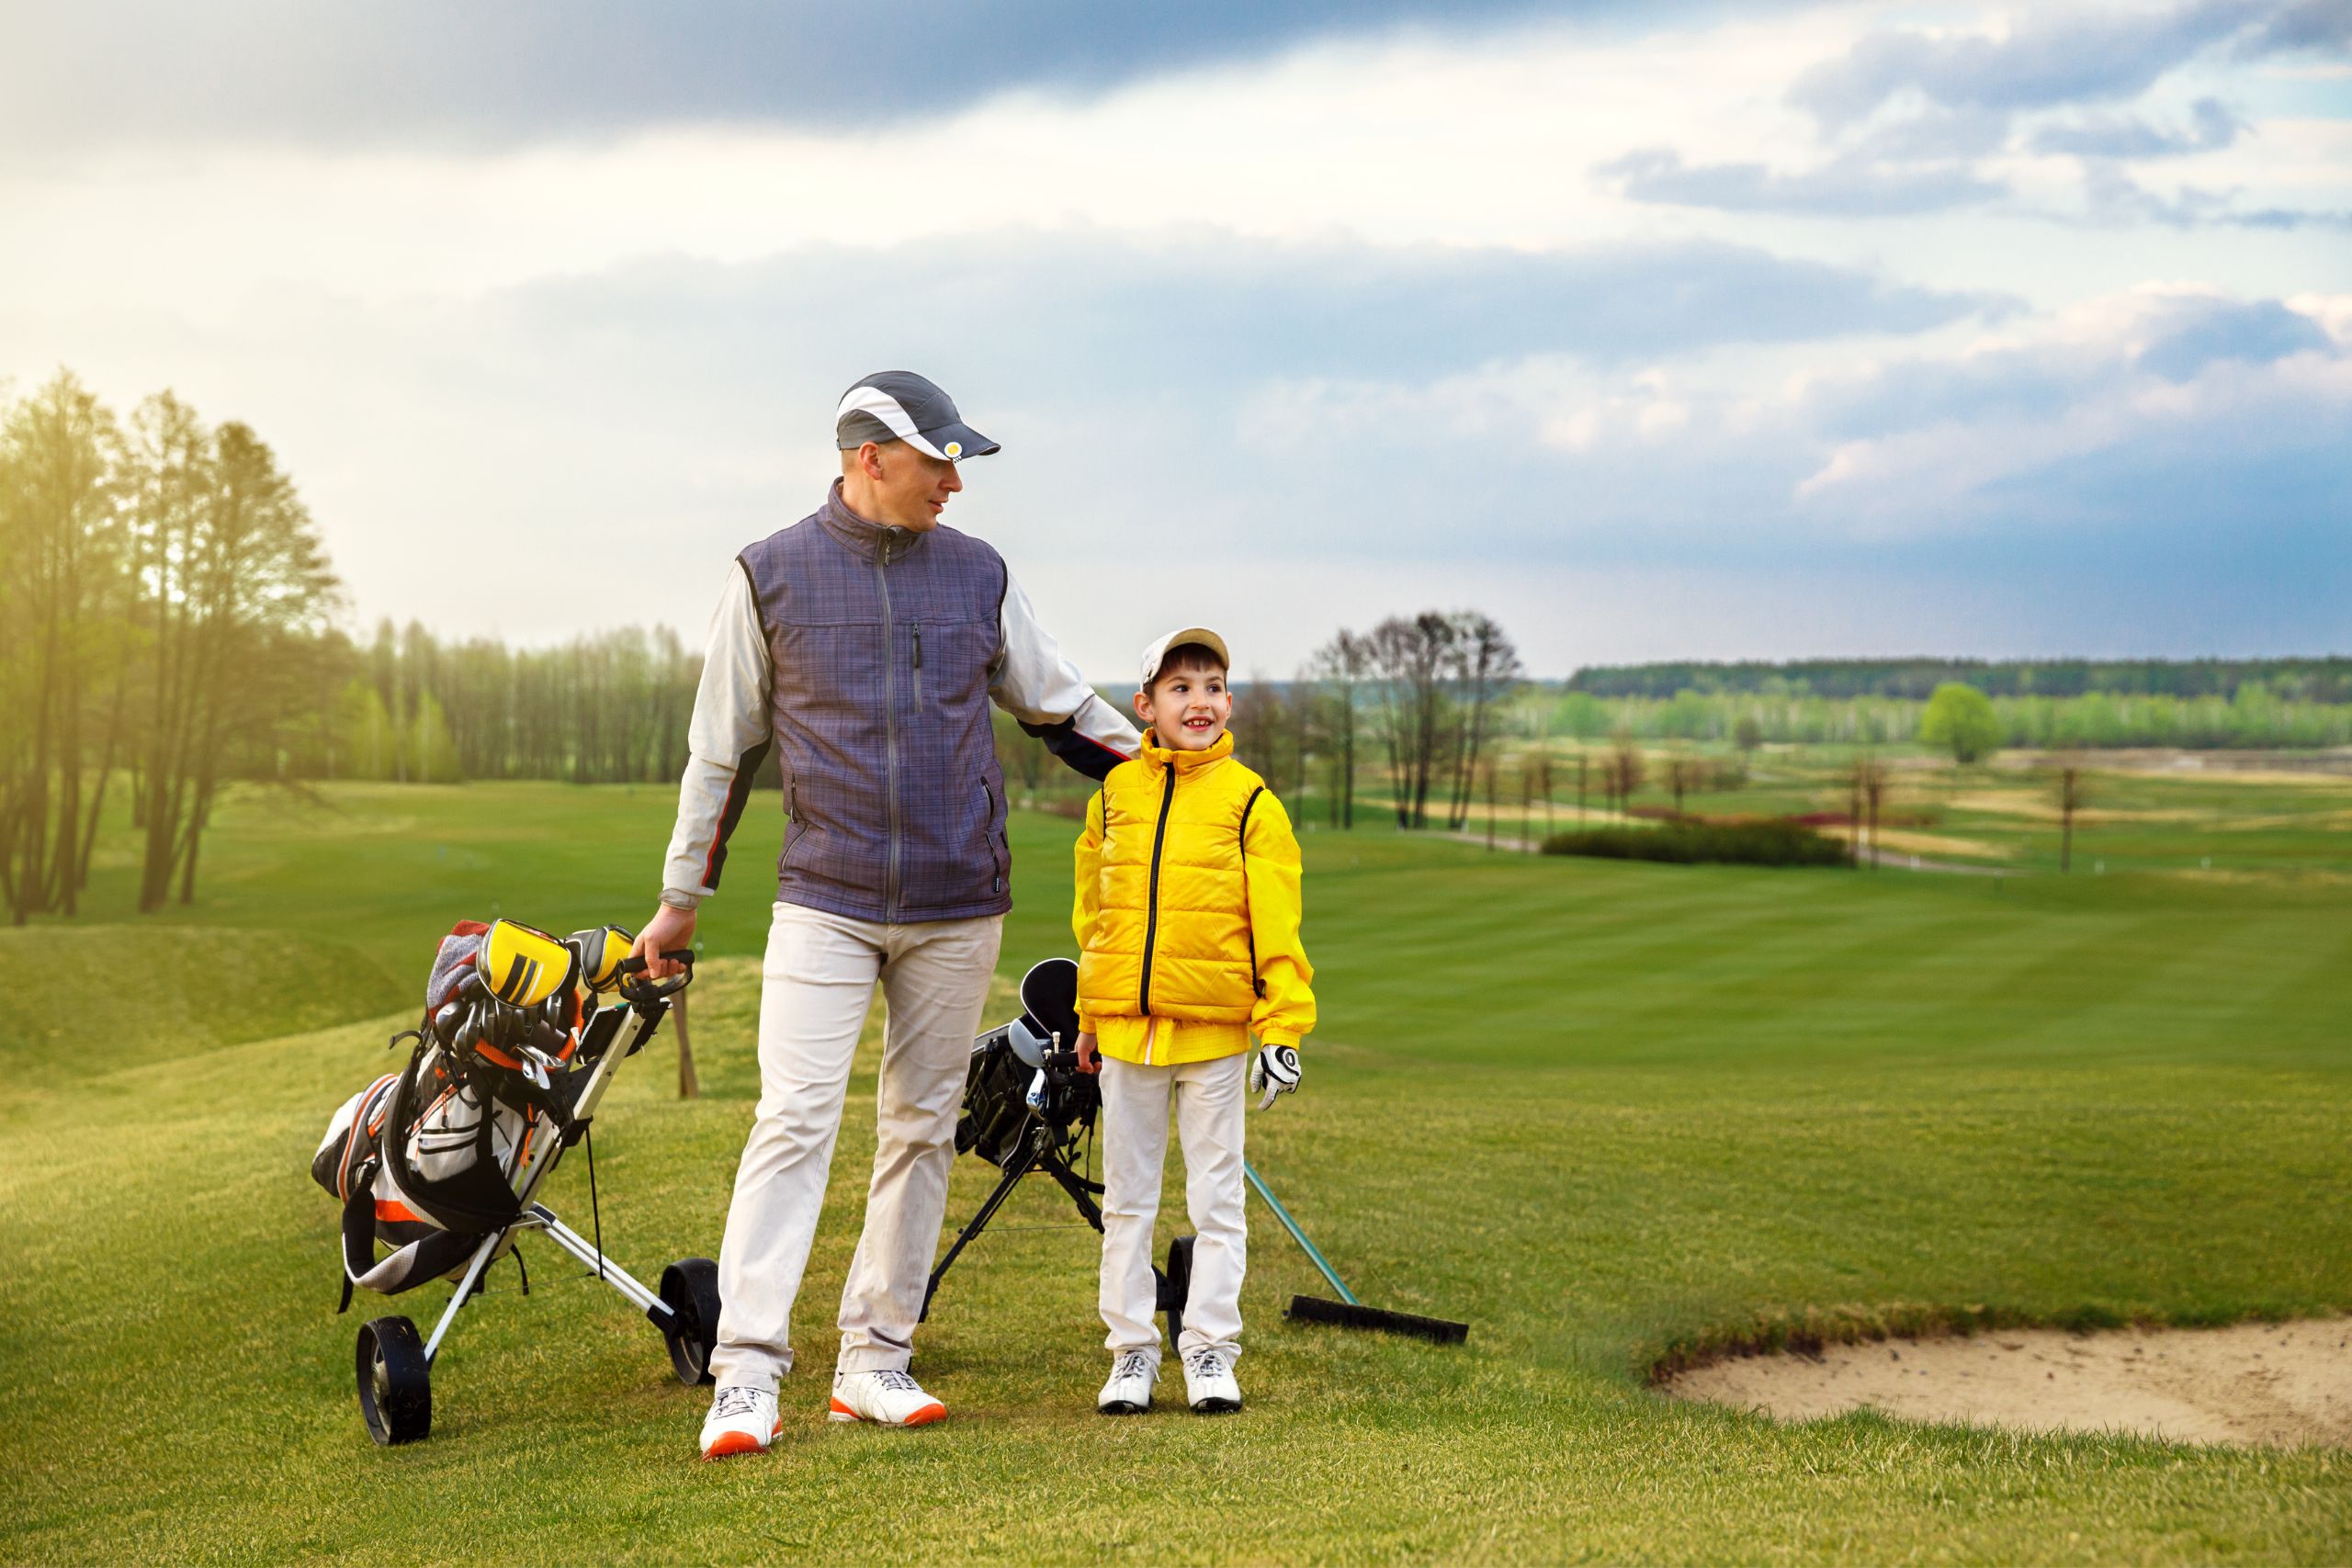 A father and his son walking with their golf club bags to the next hole on a beautiful golf course